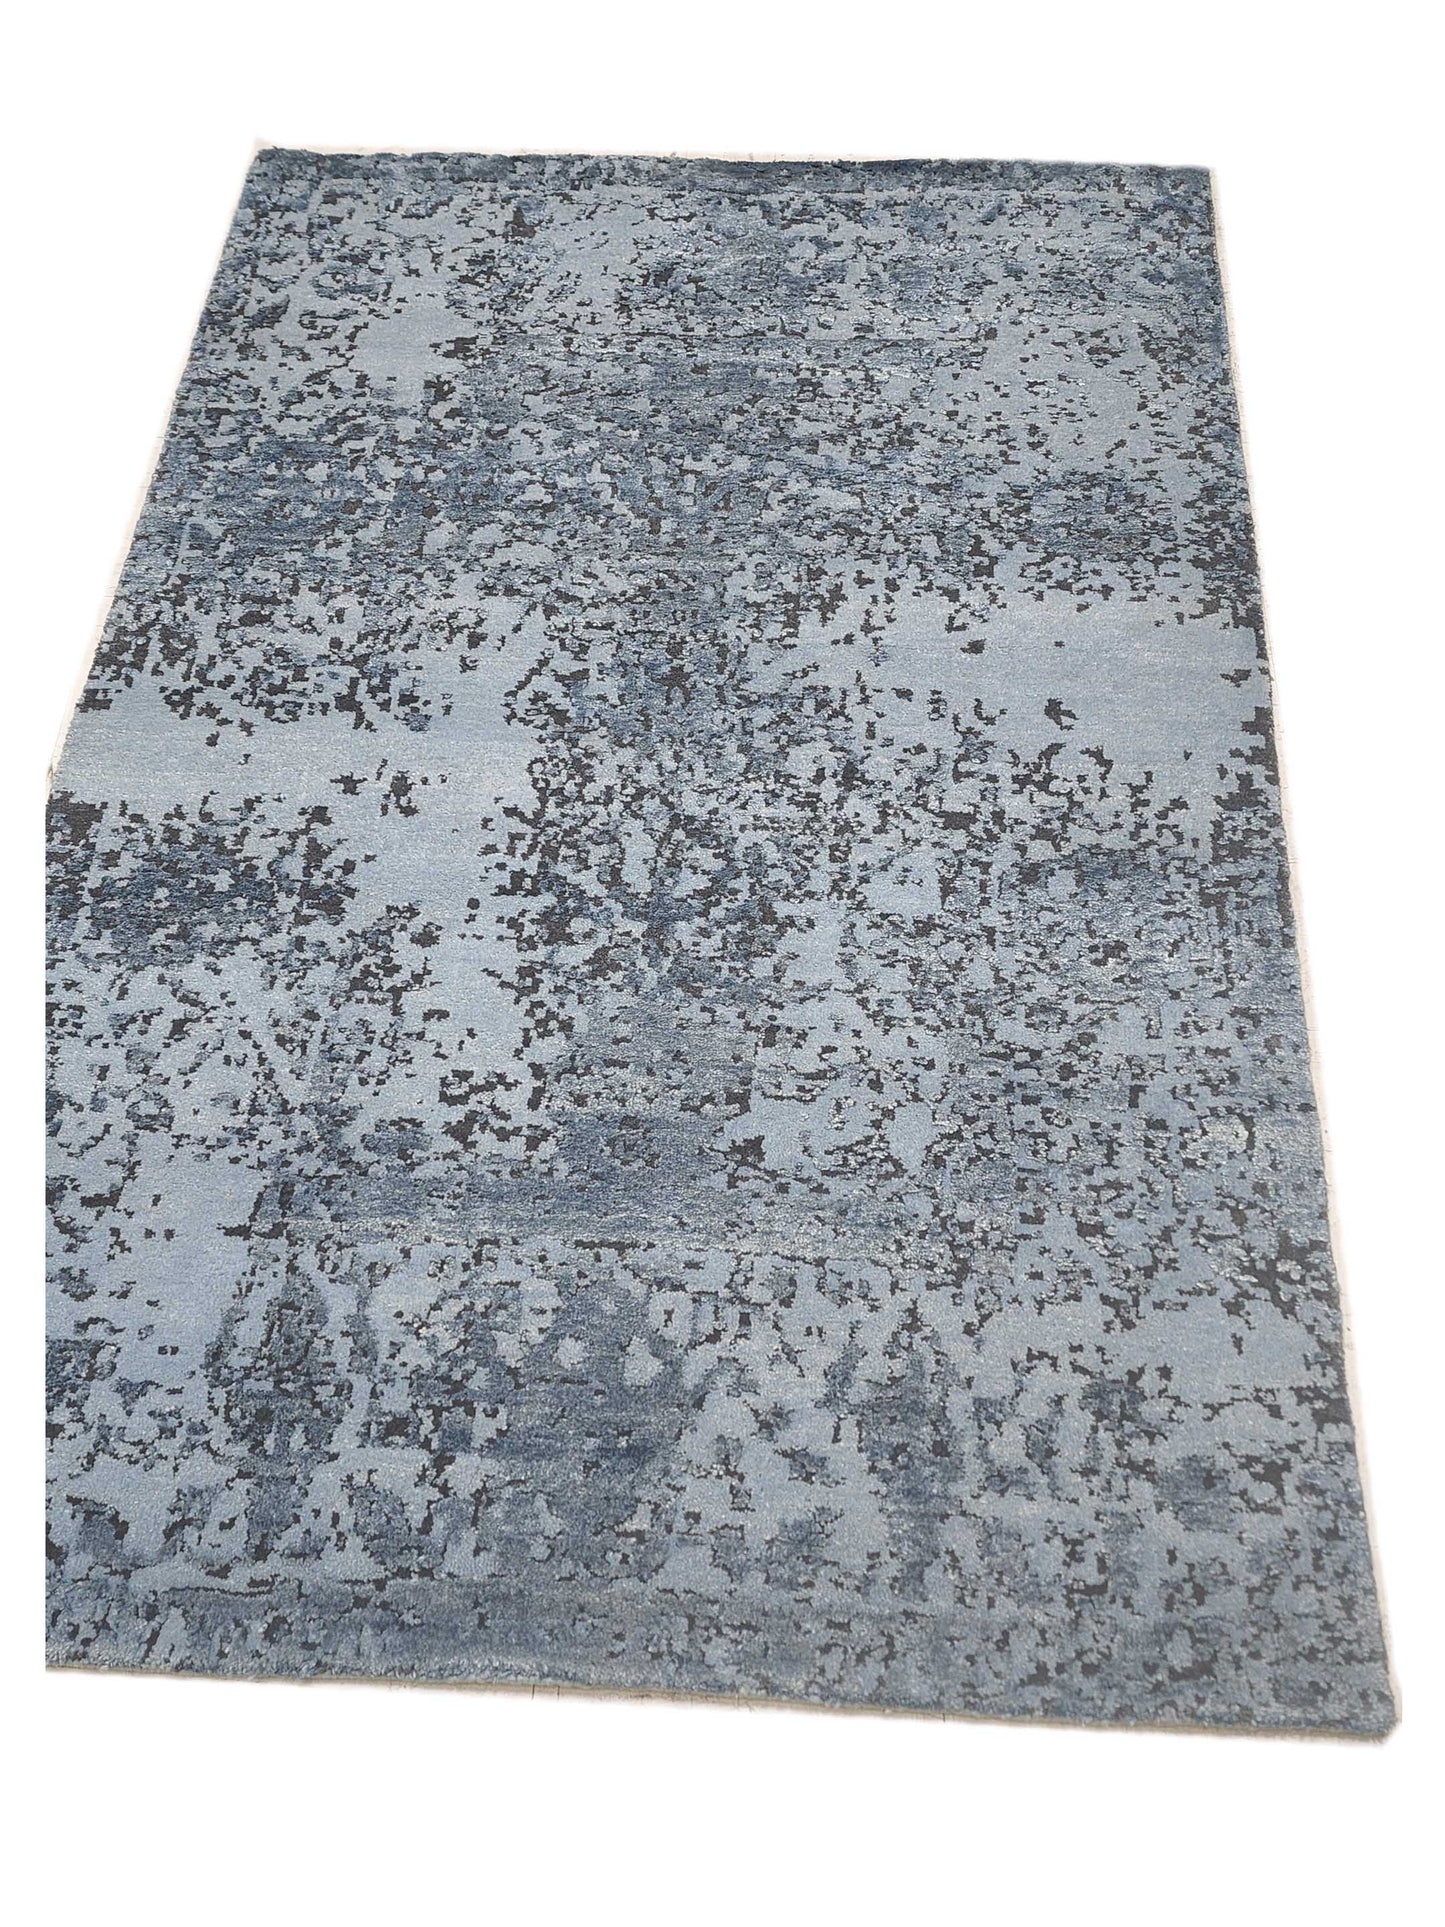 Artisan Bloom  Grey Blue Transitional Knotted Rug